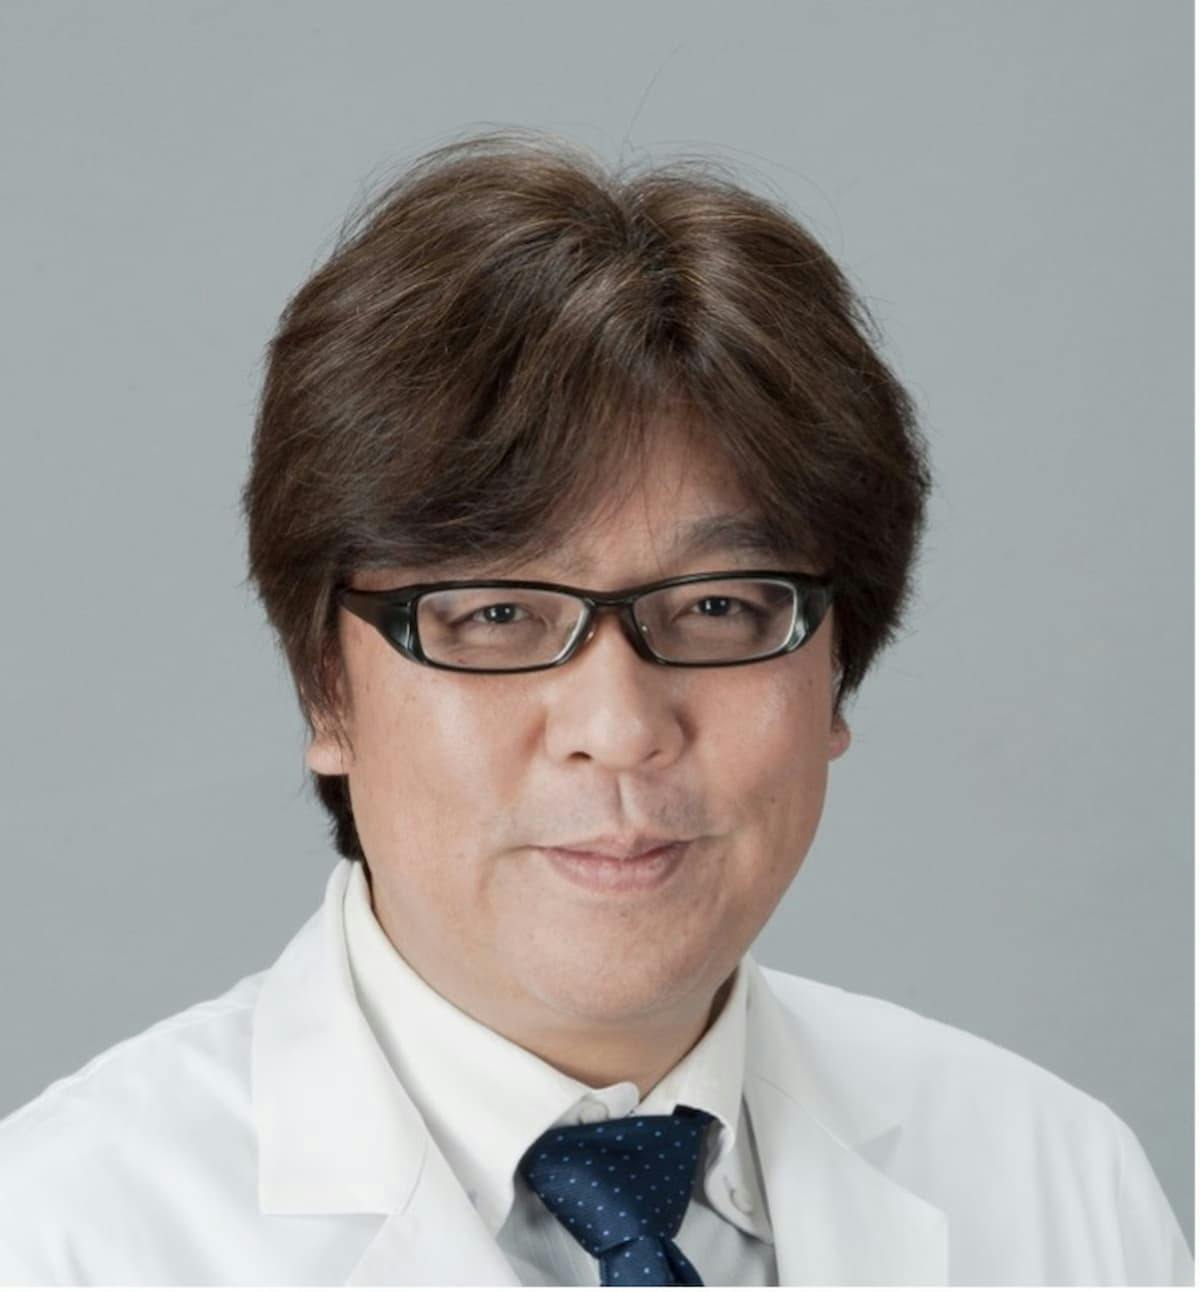 Takayuki Yoshino, MD, PhD, is director of the Department of Gastroenterology and Gastrointestinal Oncology, National Cancer Center Hospital East.